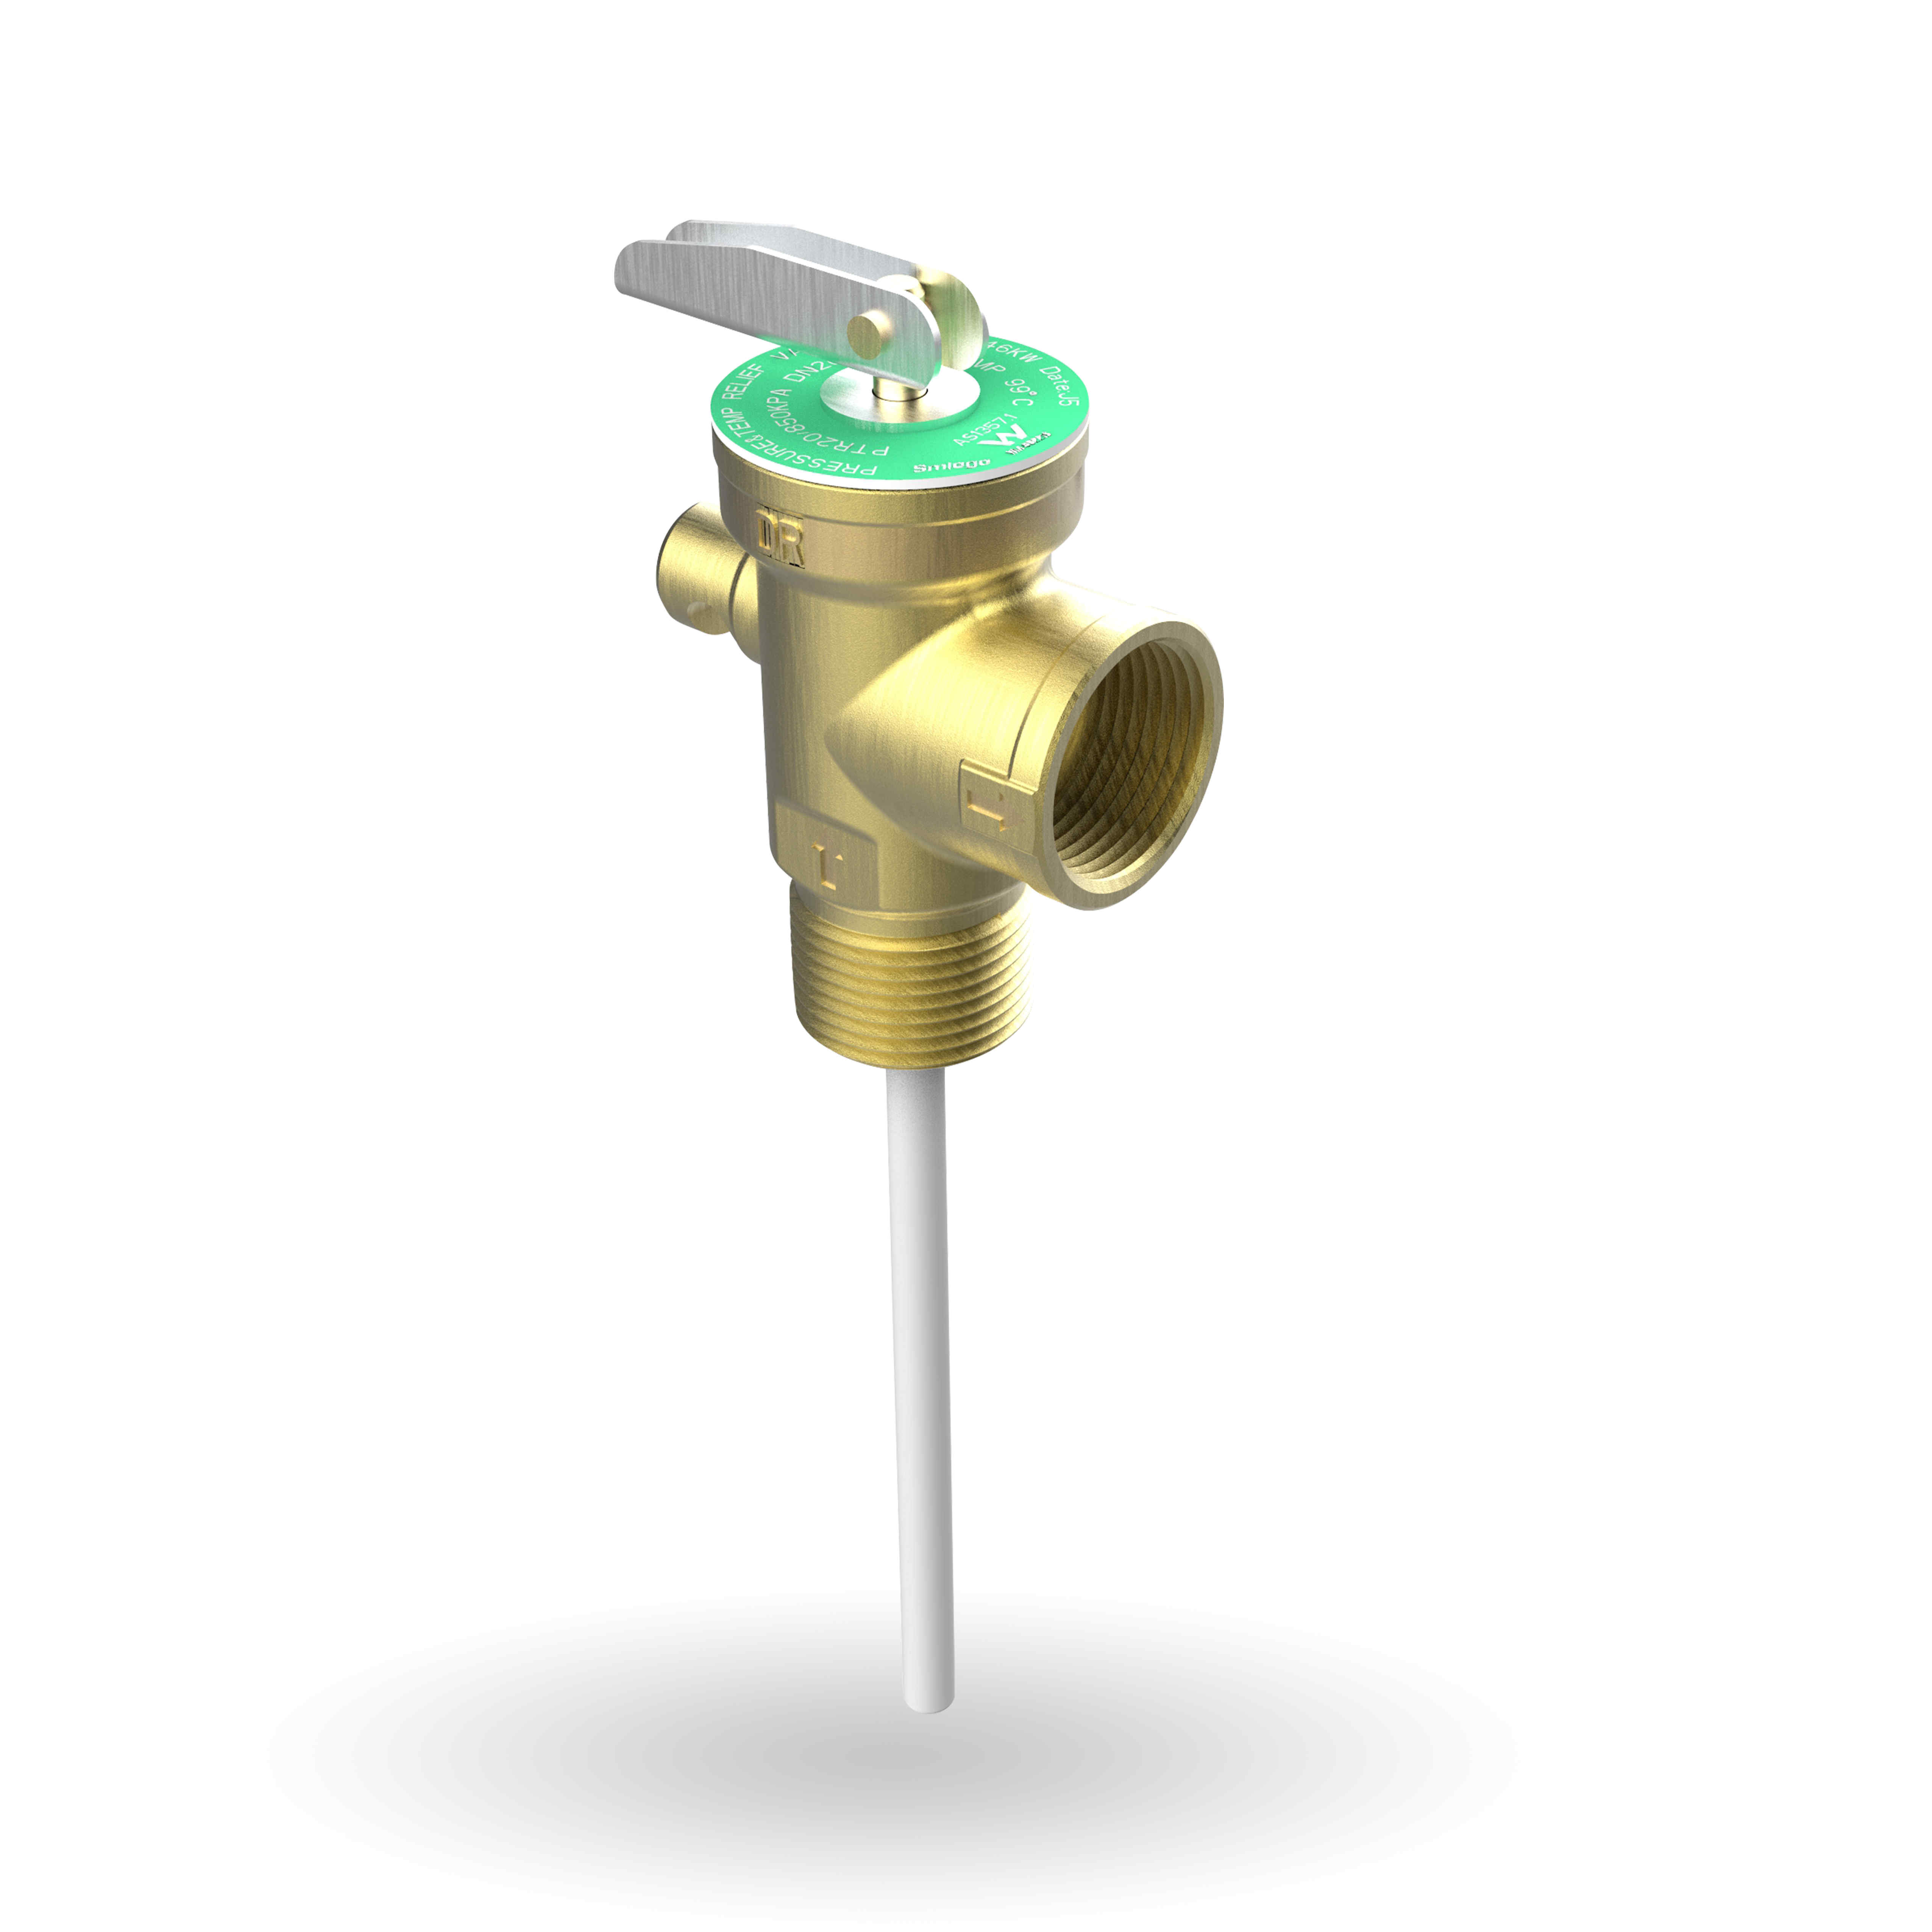 Temperature and Pressure Relief Valve (TPR valve) for Boilers, water heaters-930004NT